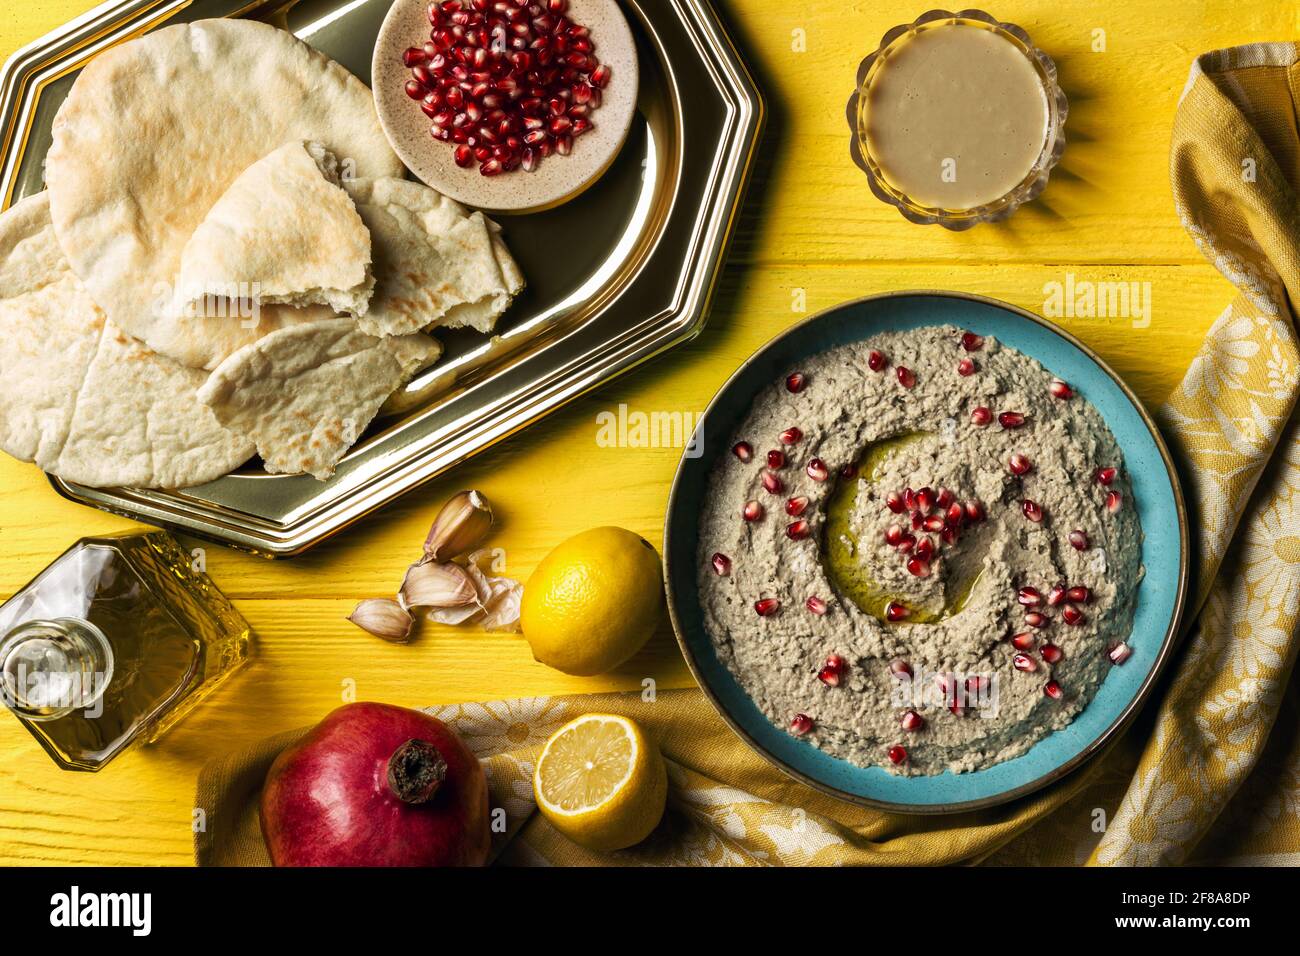 Baba ganoush or mutabal, Middle Eastern eggplant dip sauce garnished with pomegranate seeds, with various ingredients and served in a light blue plate Stock Photo